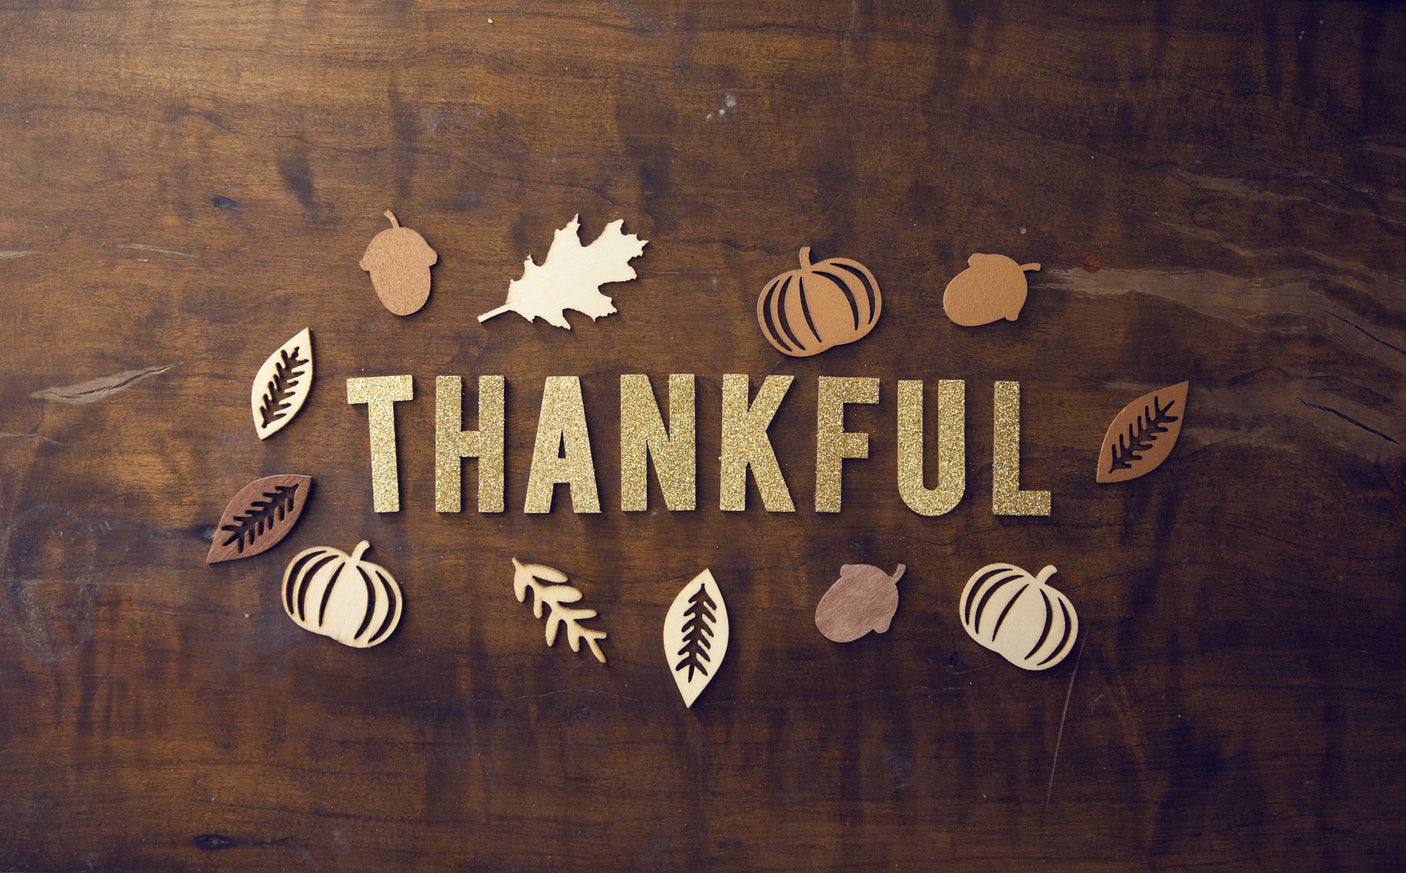 Top Thanksgiving Day Values to add to your Marketing - Expressing gratitude